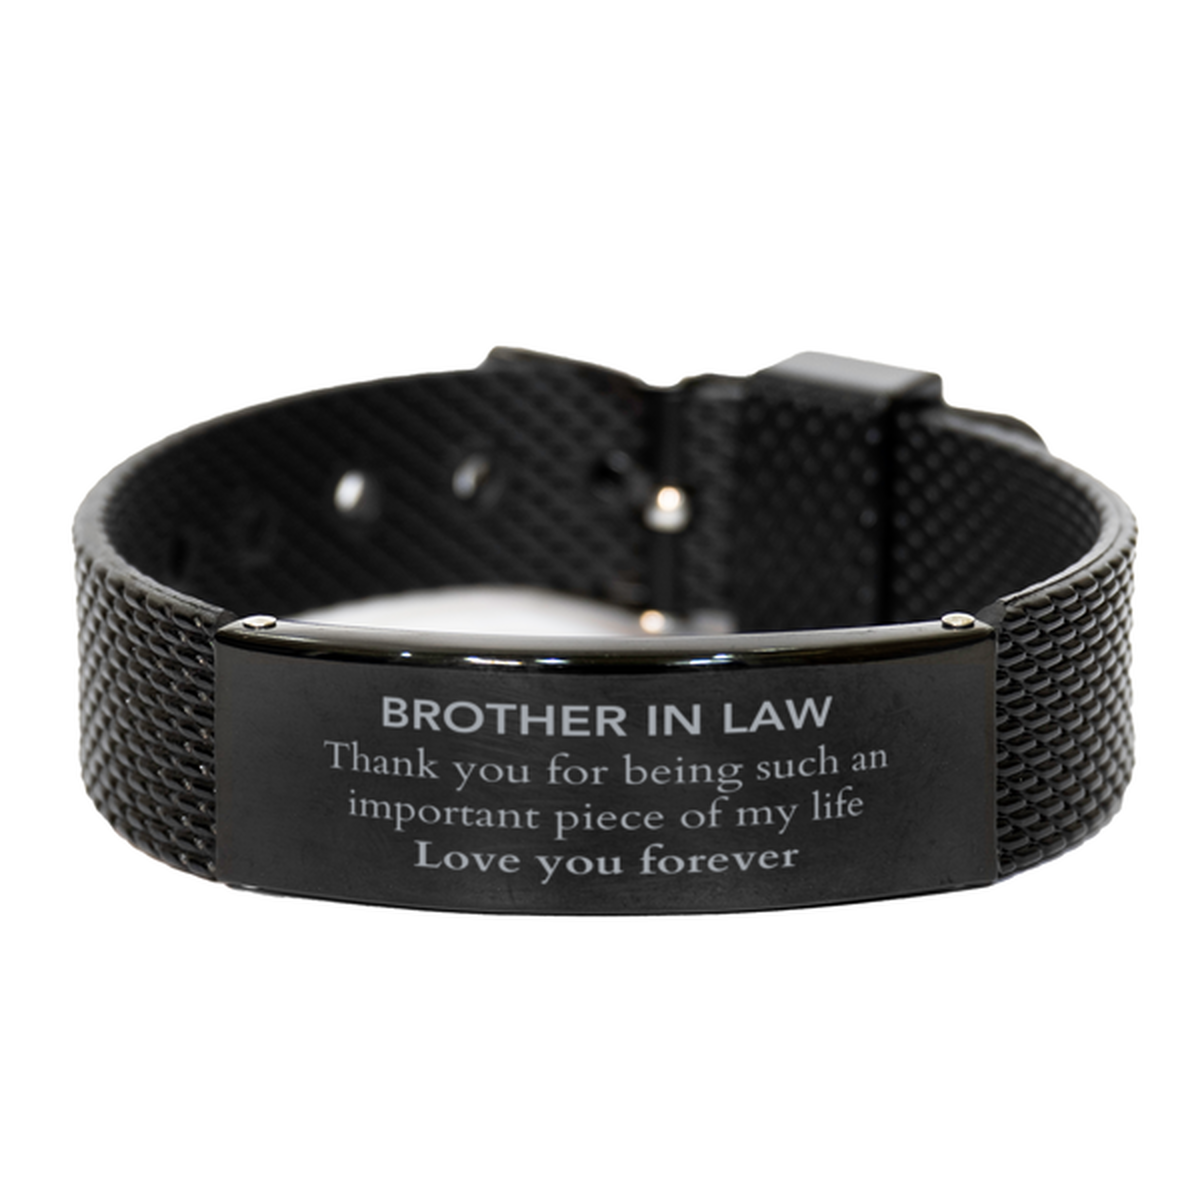 Appropriate Brother In Law Black Shark Mesh Bracelet Epic Birthday Gifts for Brother In Law Thank you for being such an important piece of my life Brother In Law Christmas Mothers Fathers Day